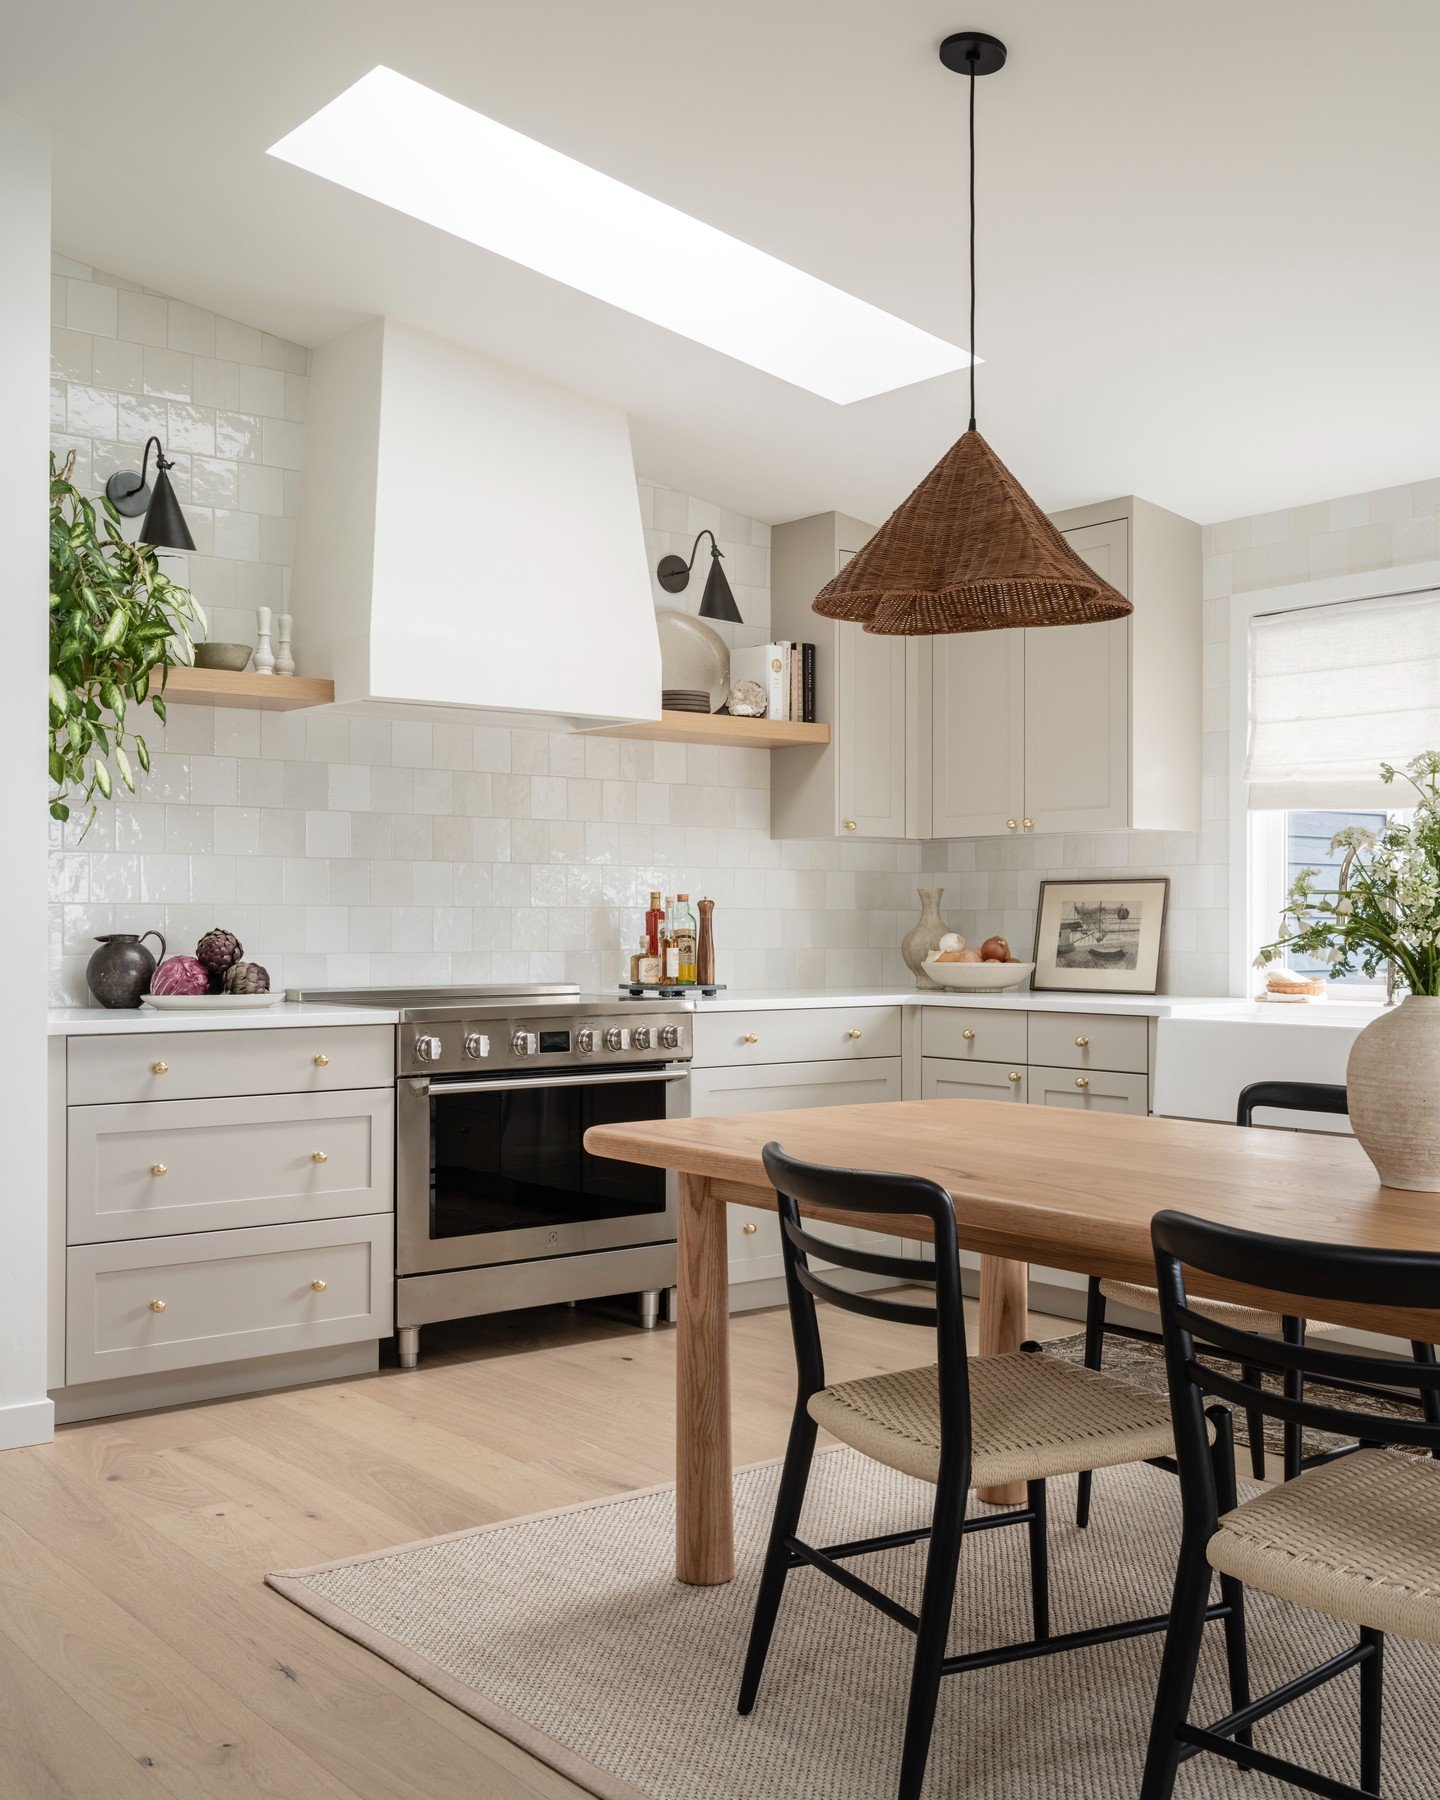 When we first met this kitchen, it was completely cut off from lovely western facing lake views. The choppy spaces certainly weren't serving this family of six, so we blew it up and embraced the English &quot;dining-table-as-island&quot; design appro